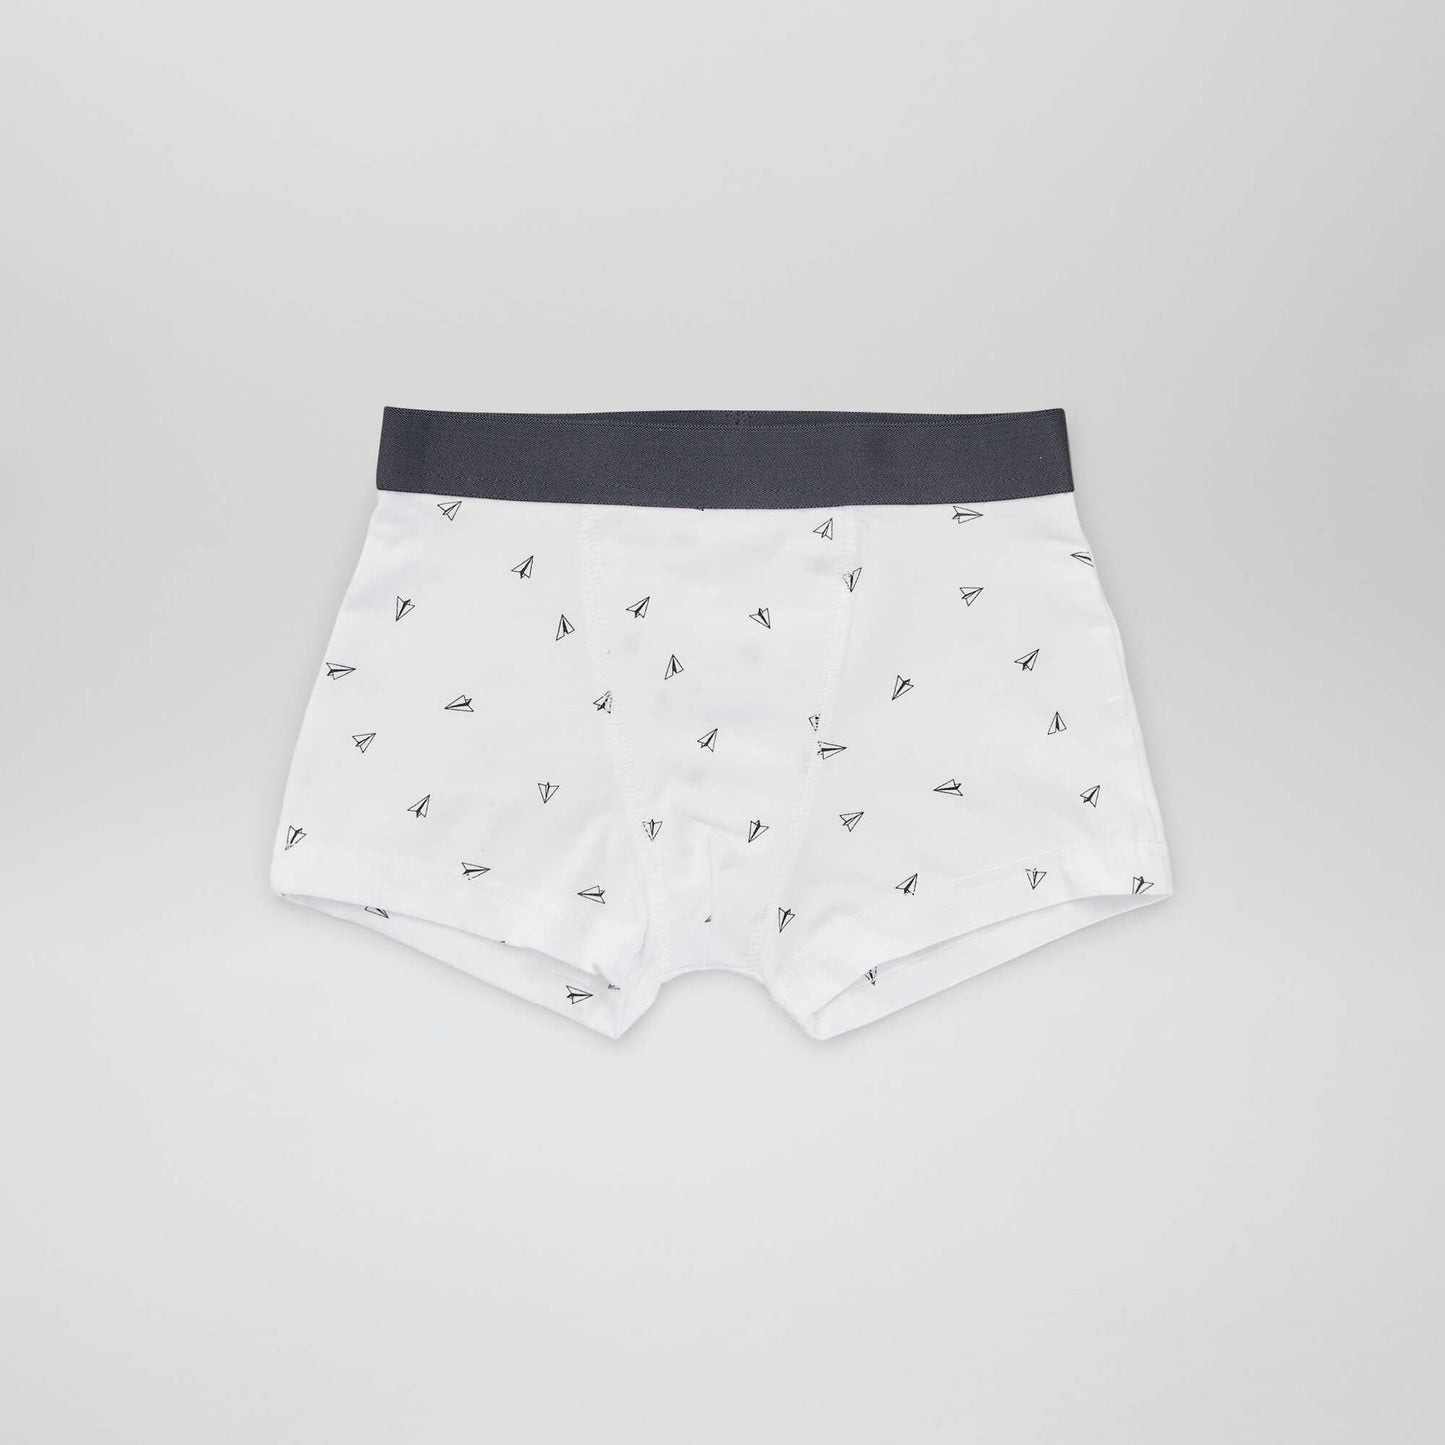 Pack of 3 pairs of boxer shorts GREY_RATIO